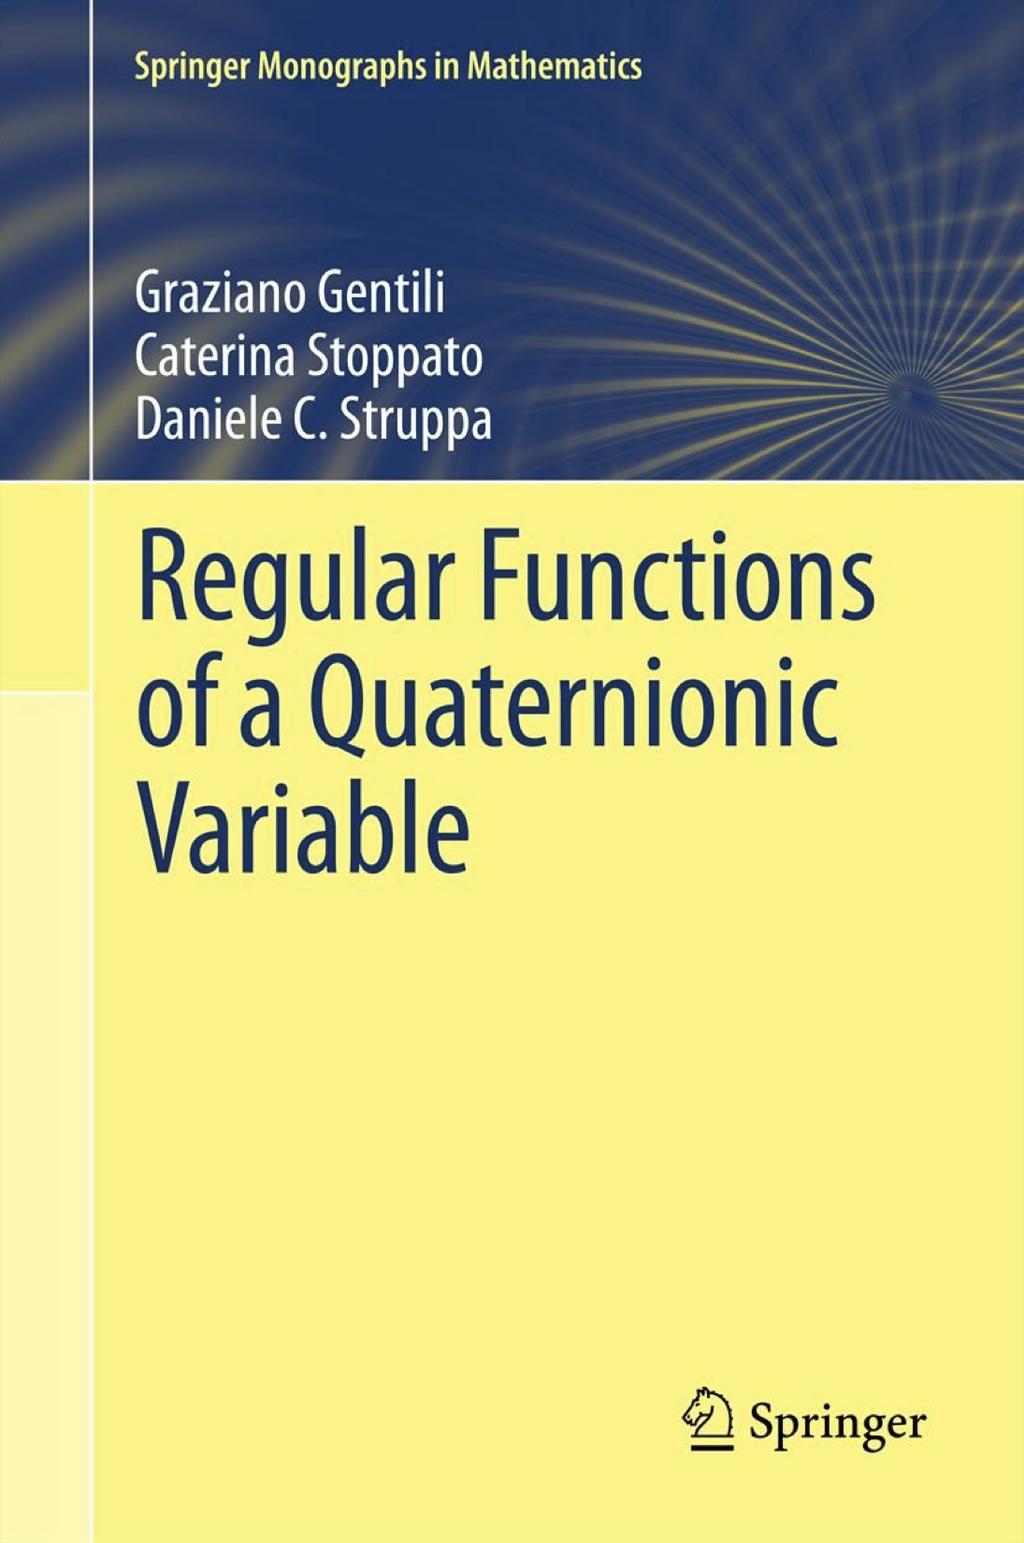 Quaternionic analysis Complex holomorphic functions have a quaternionic analogue in the notion of Cullen regular functions.